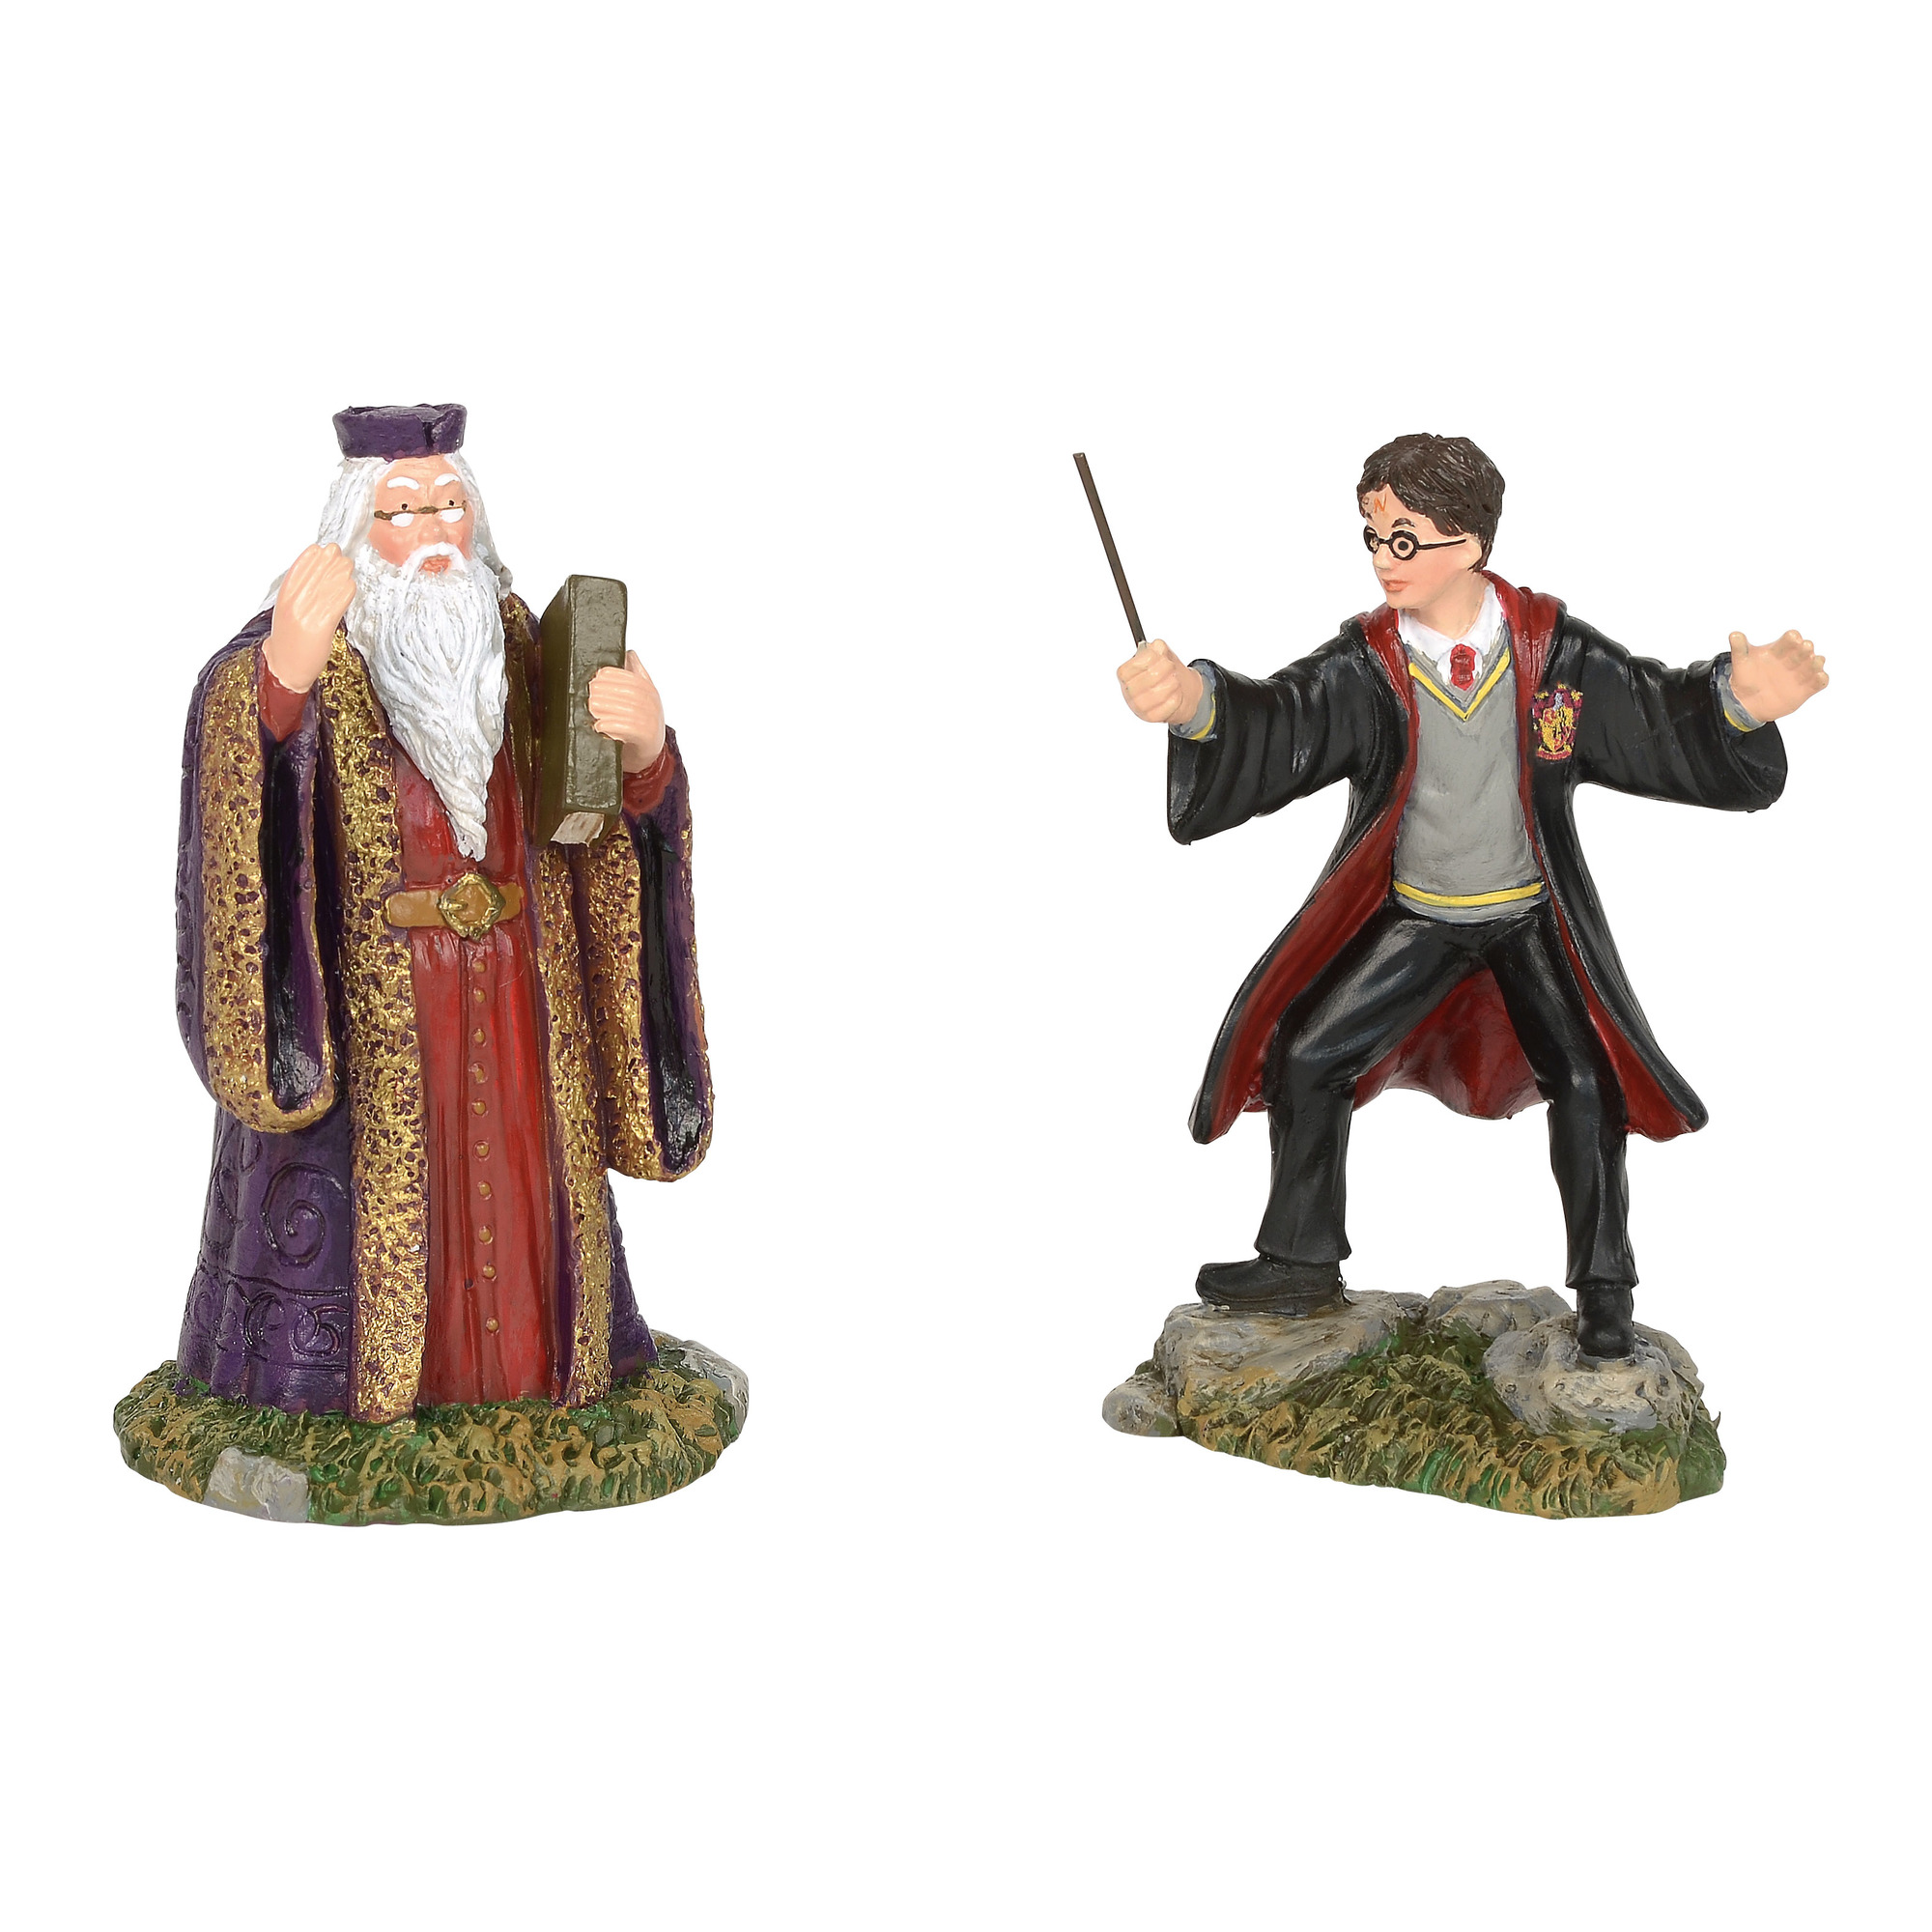 NEW 2020 Dept 56 Harry Potter Village Accessory “FRED & GEORGE WEASLEY” IOB 